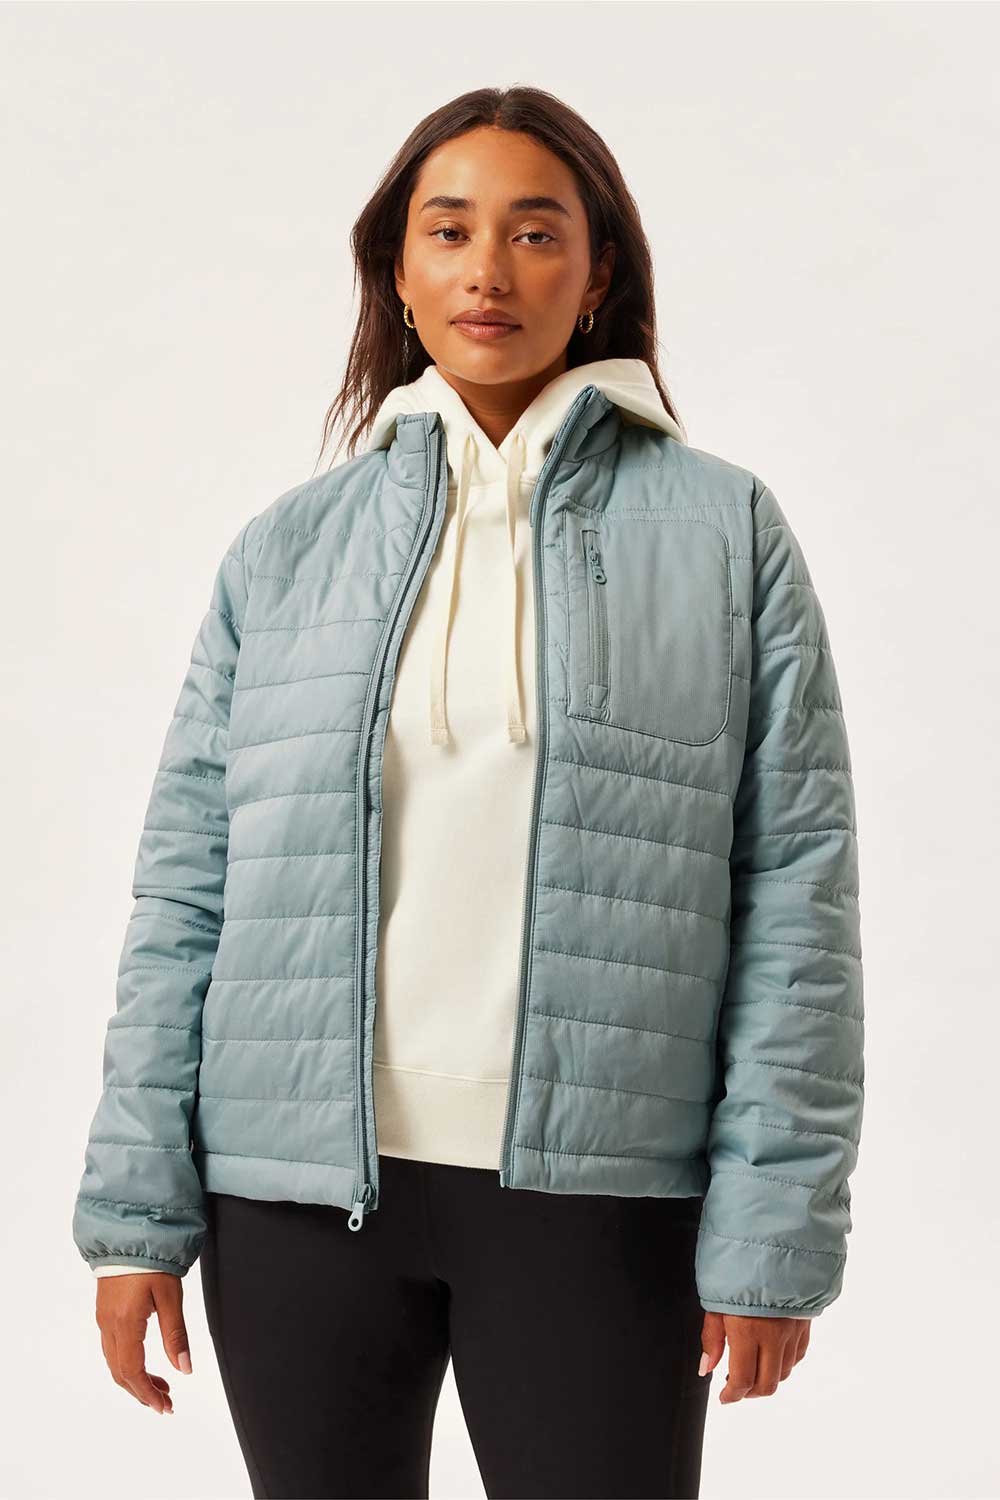 Girlfriend Collective Crystal Packable Puffer 